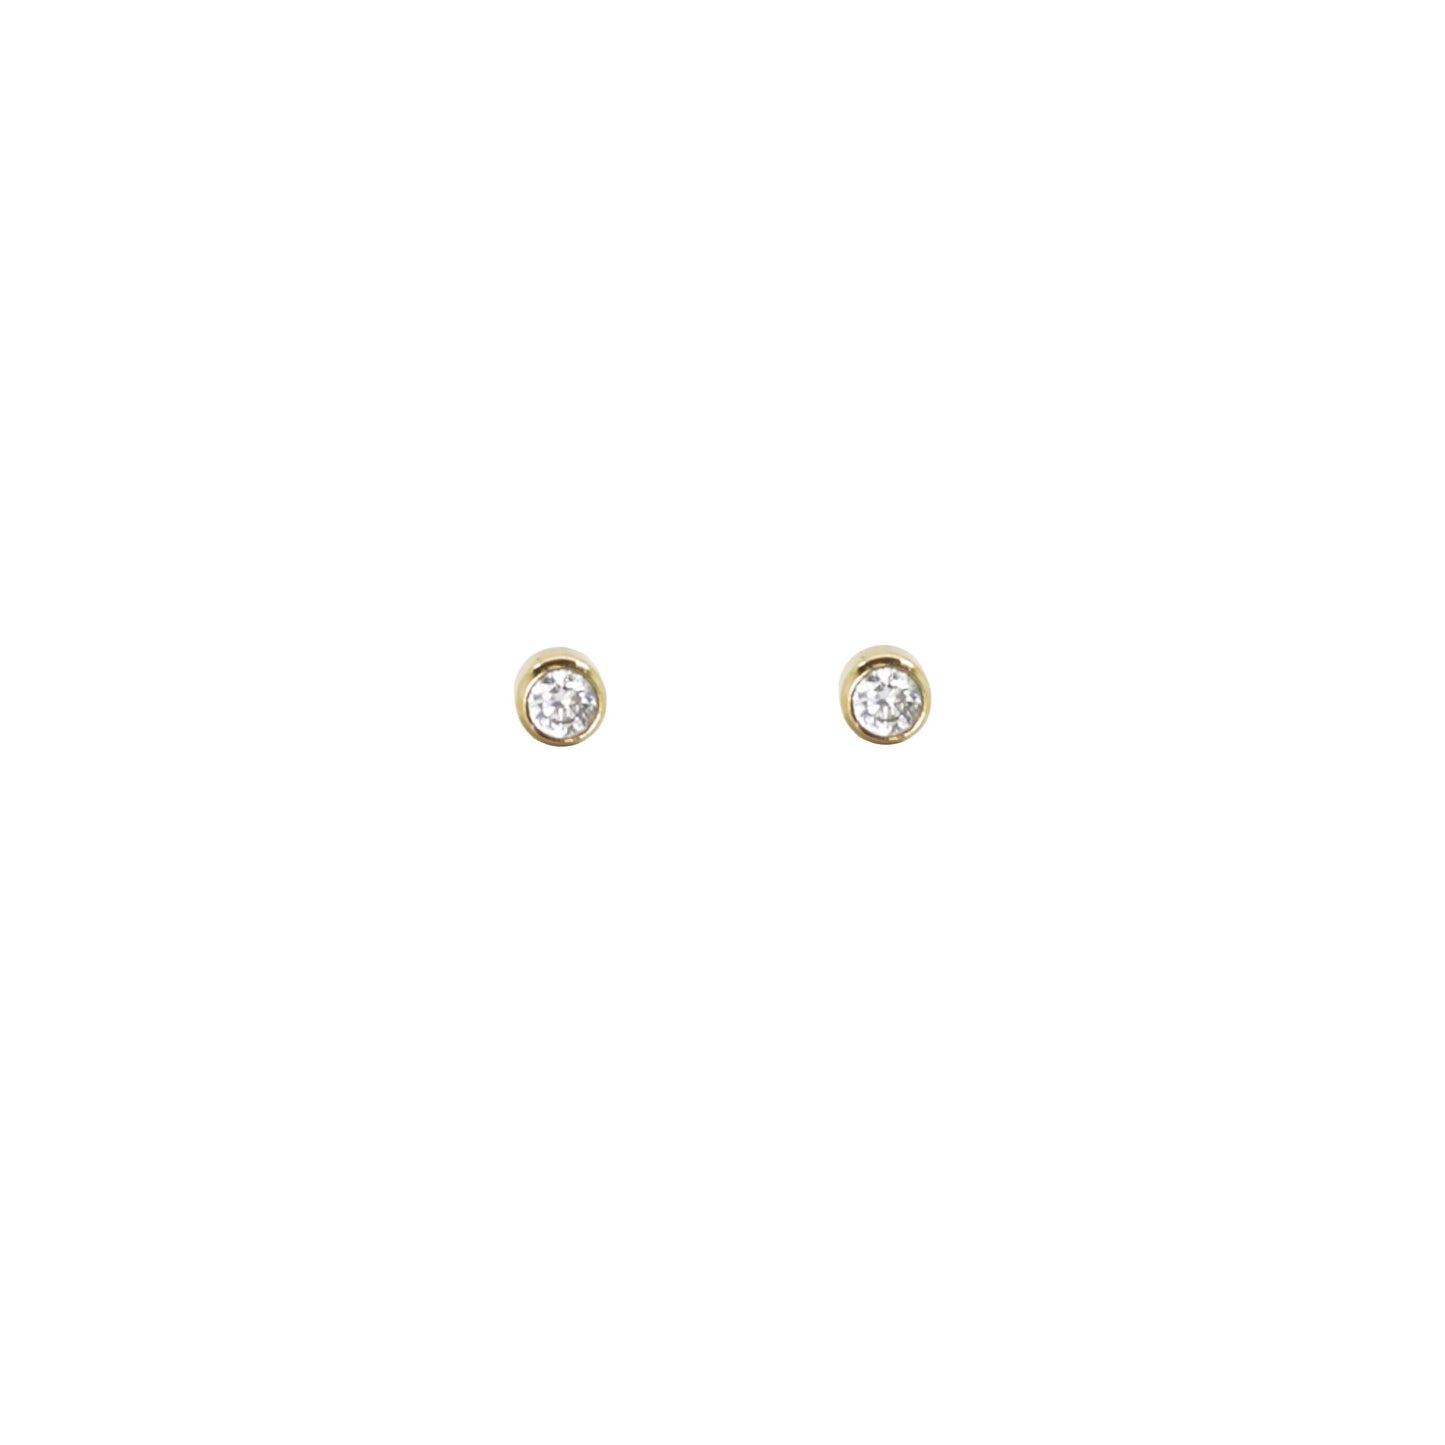 Load image into Gallery viewer, gold filled crystal stud earring. gold filled crystal stud. crystal stud earring. qz stud earring. Effortless stud earring. Effortless crystal stud earring. Gems by Laura.
